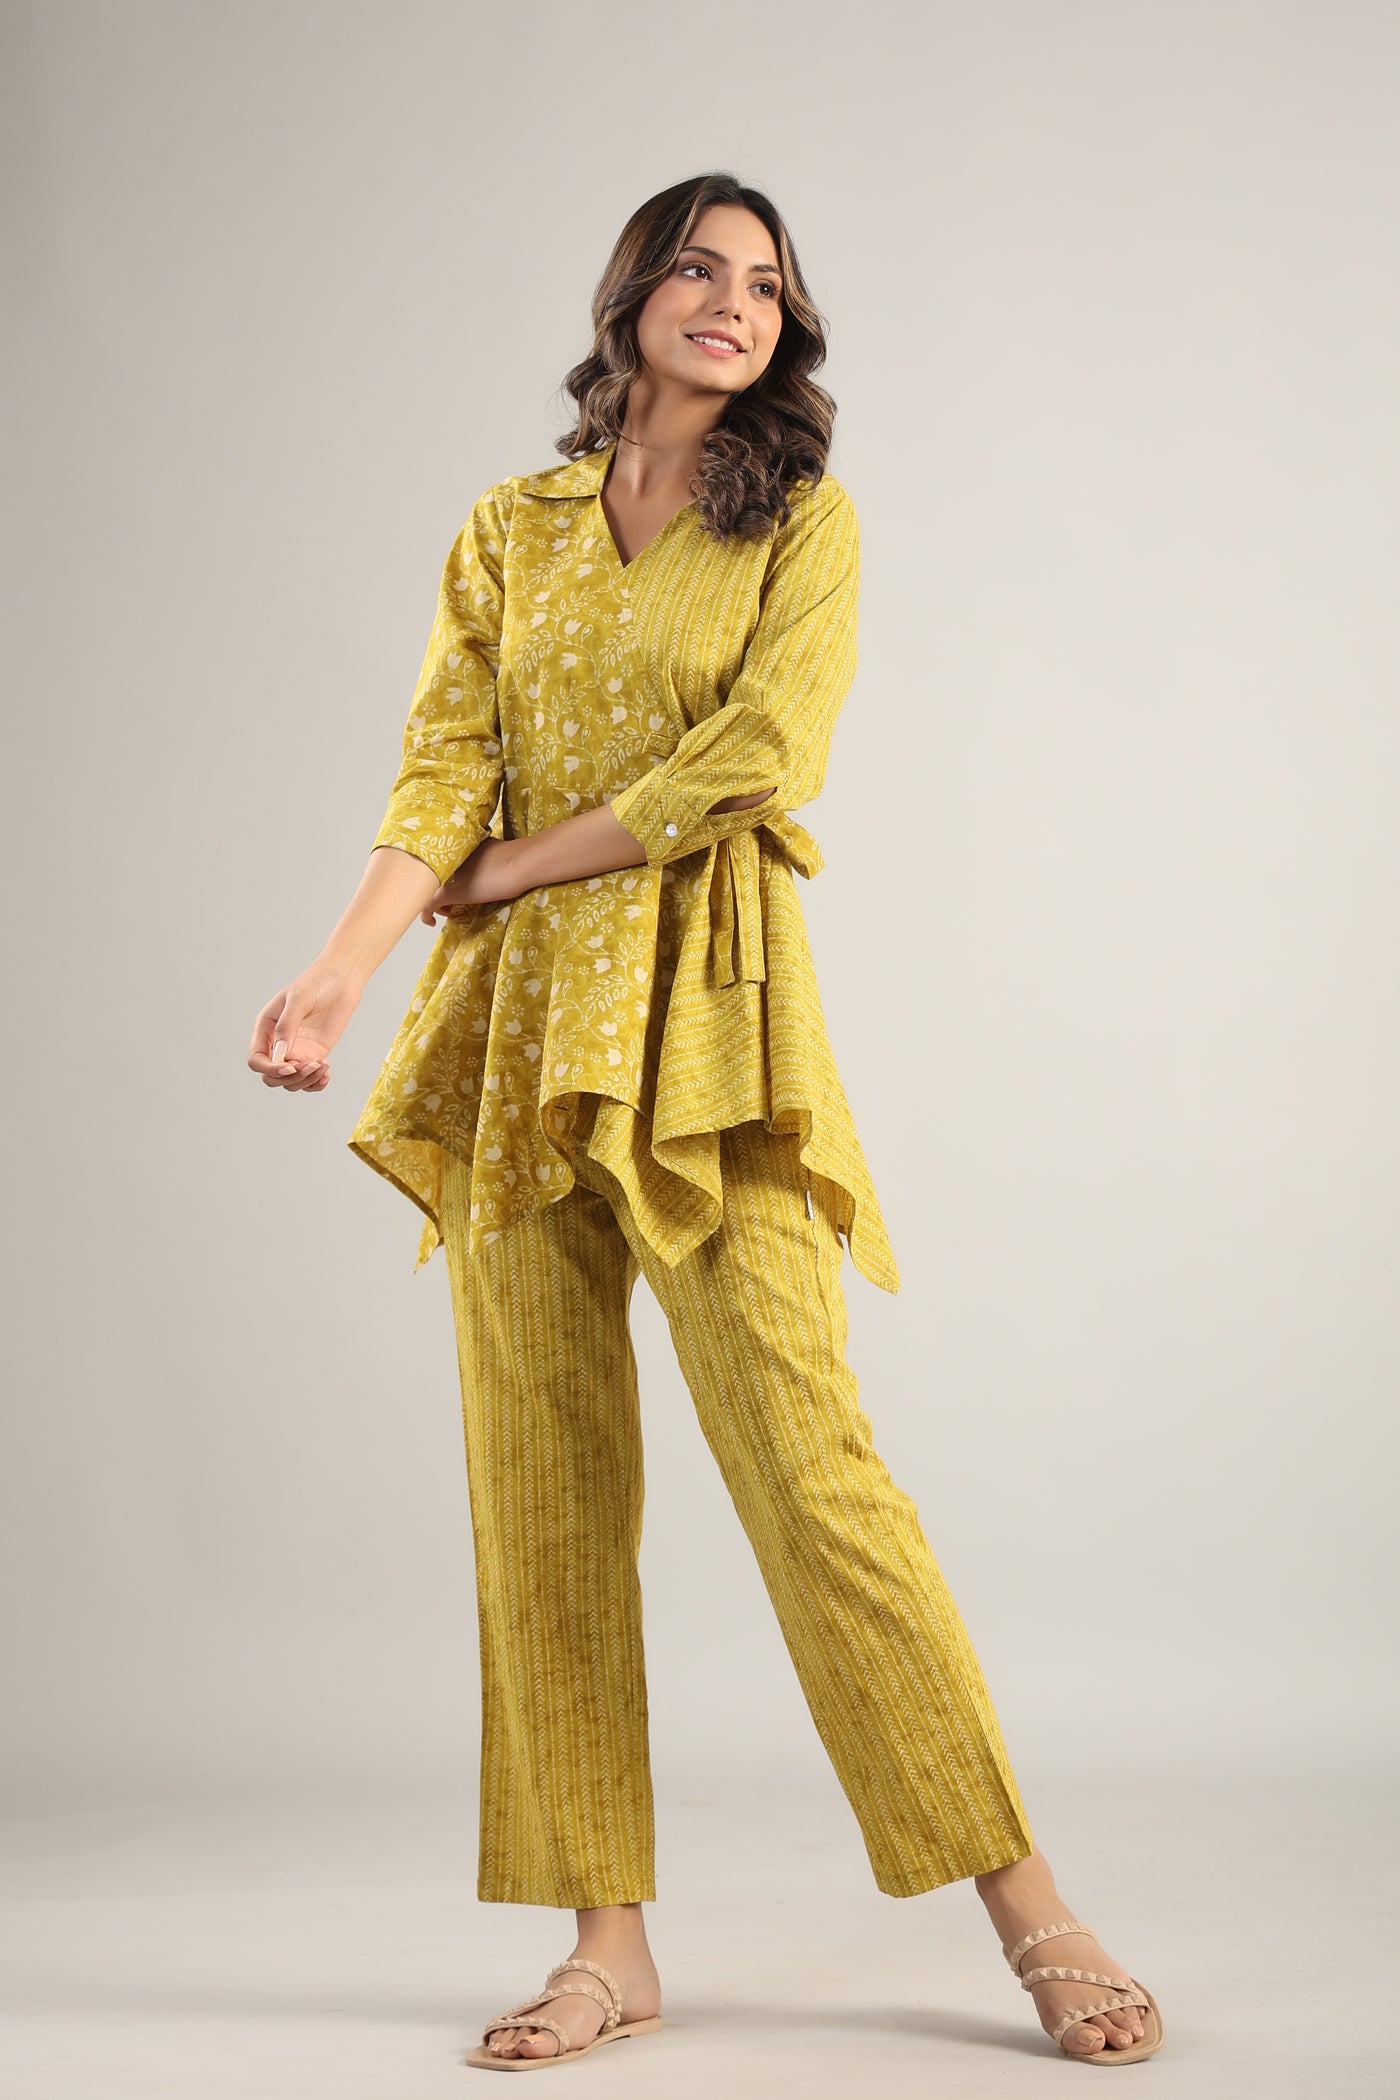 Dainty Florals with Arrows on Yellow Cotton Co ord Set